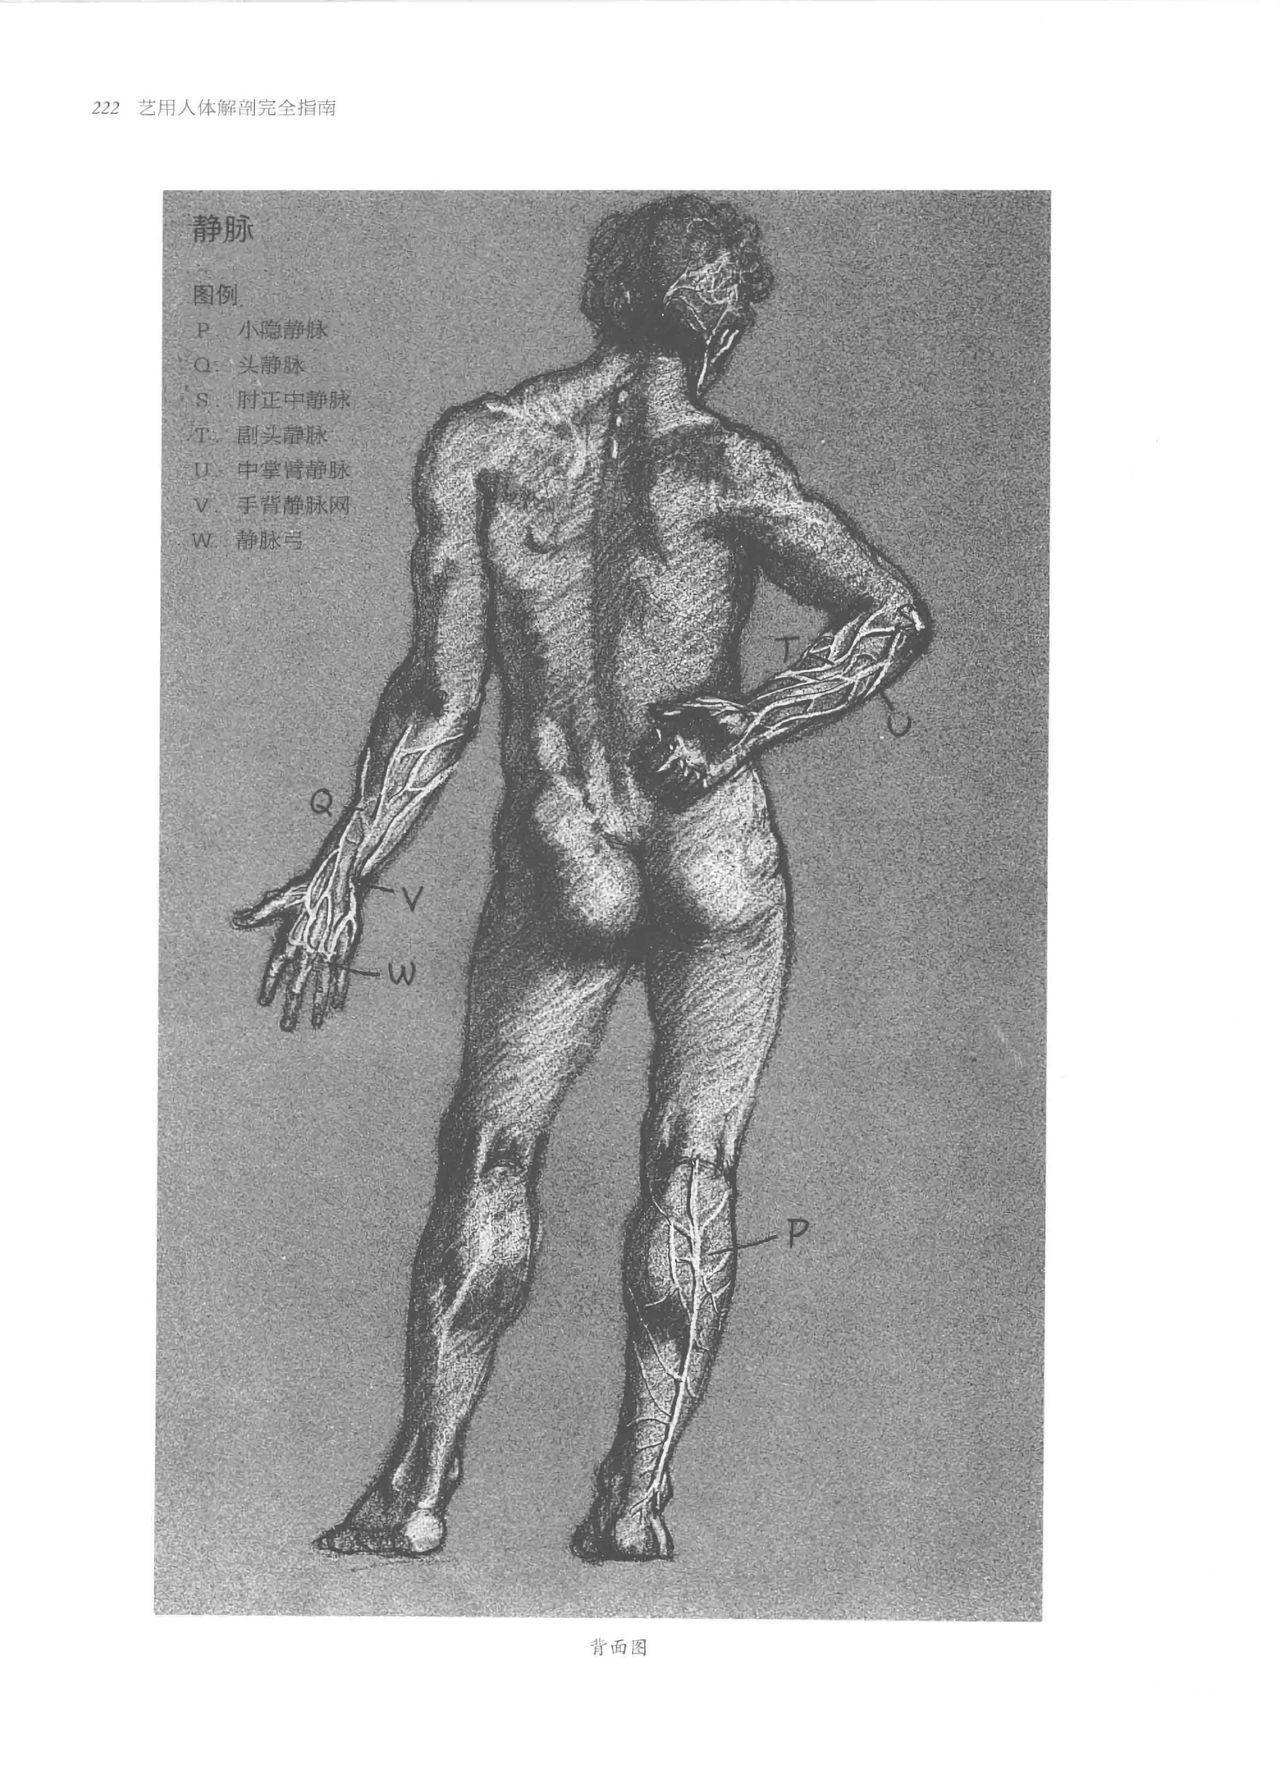 Anatomy-A Complete Guide for Artists - Joseph Sheppard [Chinese] 222